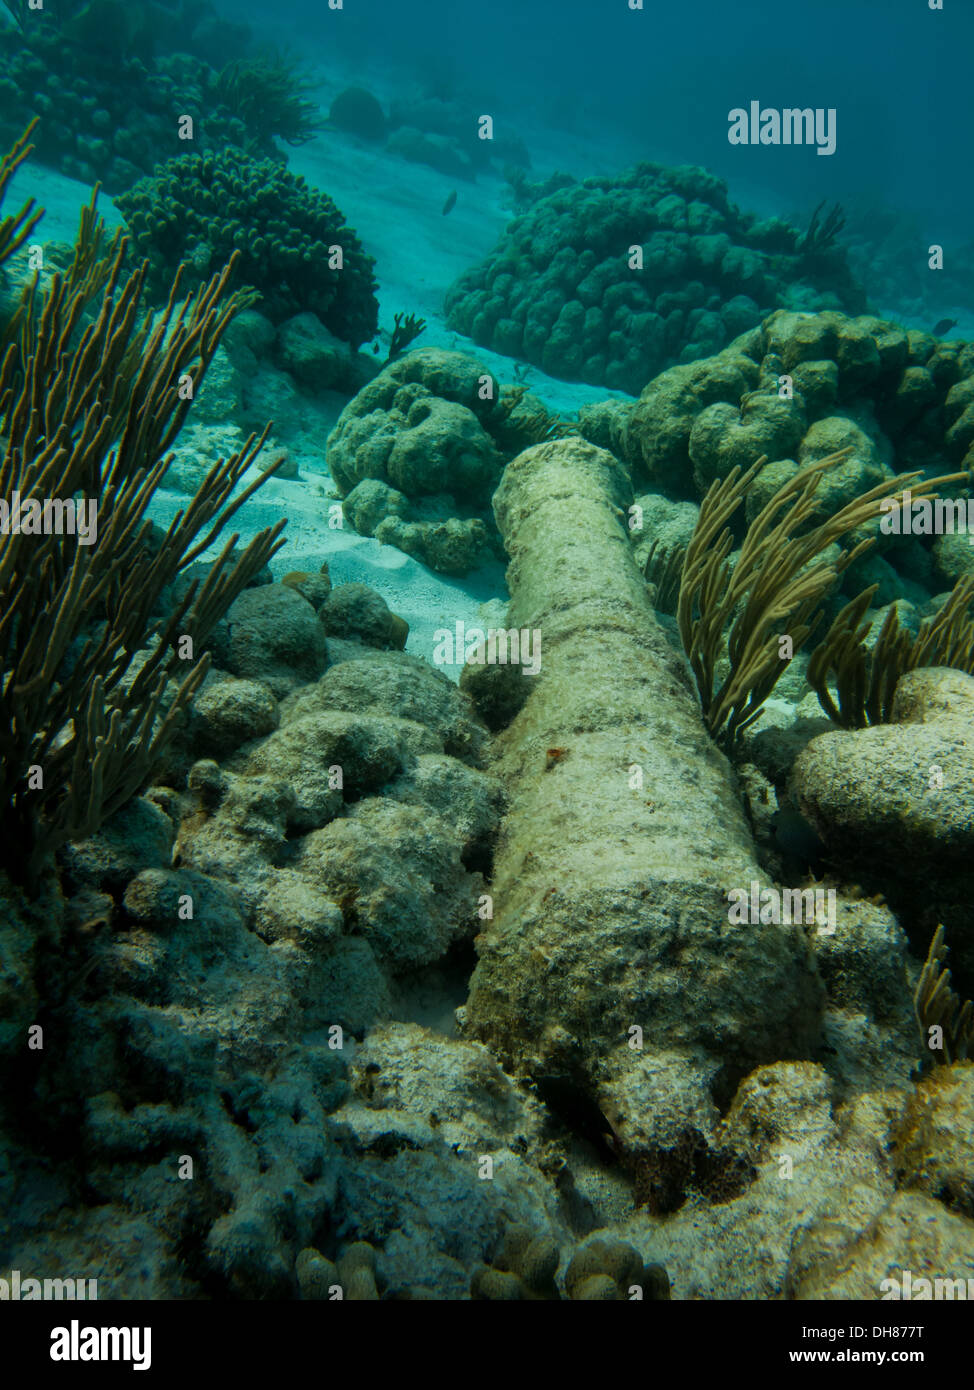 Underwater divers view of old cannon from a ship on the floor of the coral reef in the British Virgin Islands Caribbean sea Stock Photo